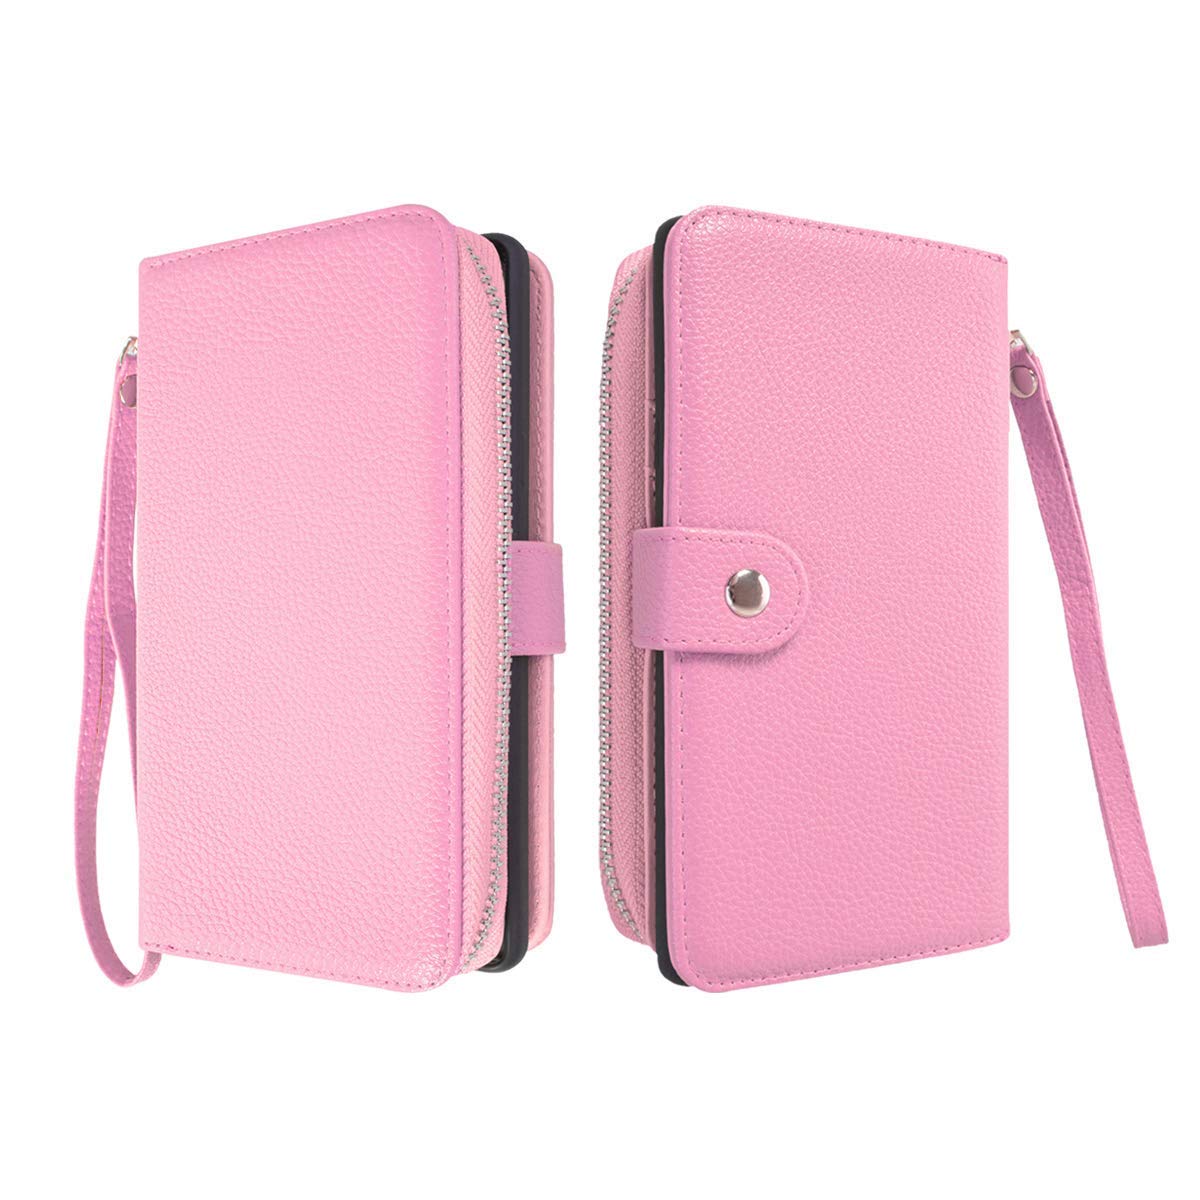 Galaxy Note 9 Case 2018, Mignova 2-in-1 Zipper Wallet Case for Samsung Galaxy note 9 PU Case Removable - Leather Flap Wallet Case Cover for Samsung Galaxy note 9(Light Pink) - image 4 of 8